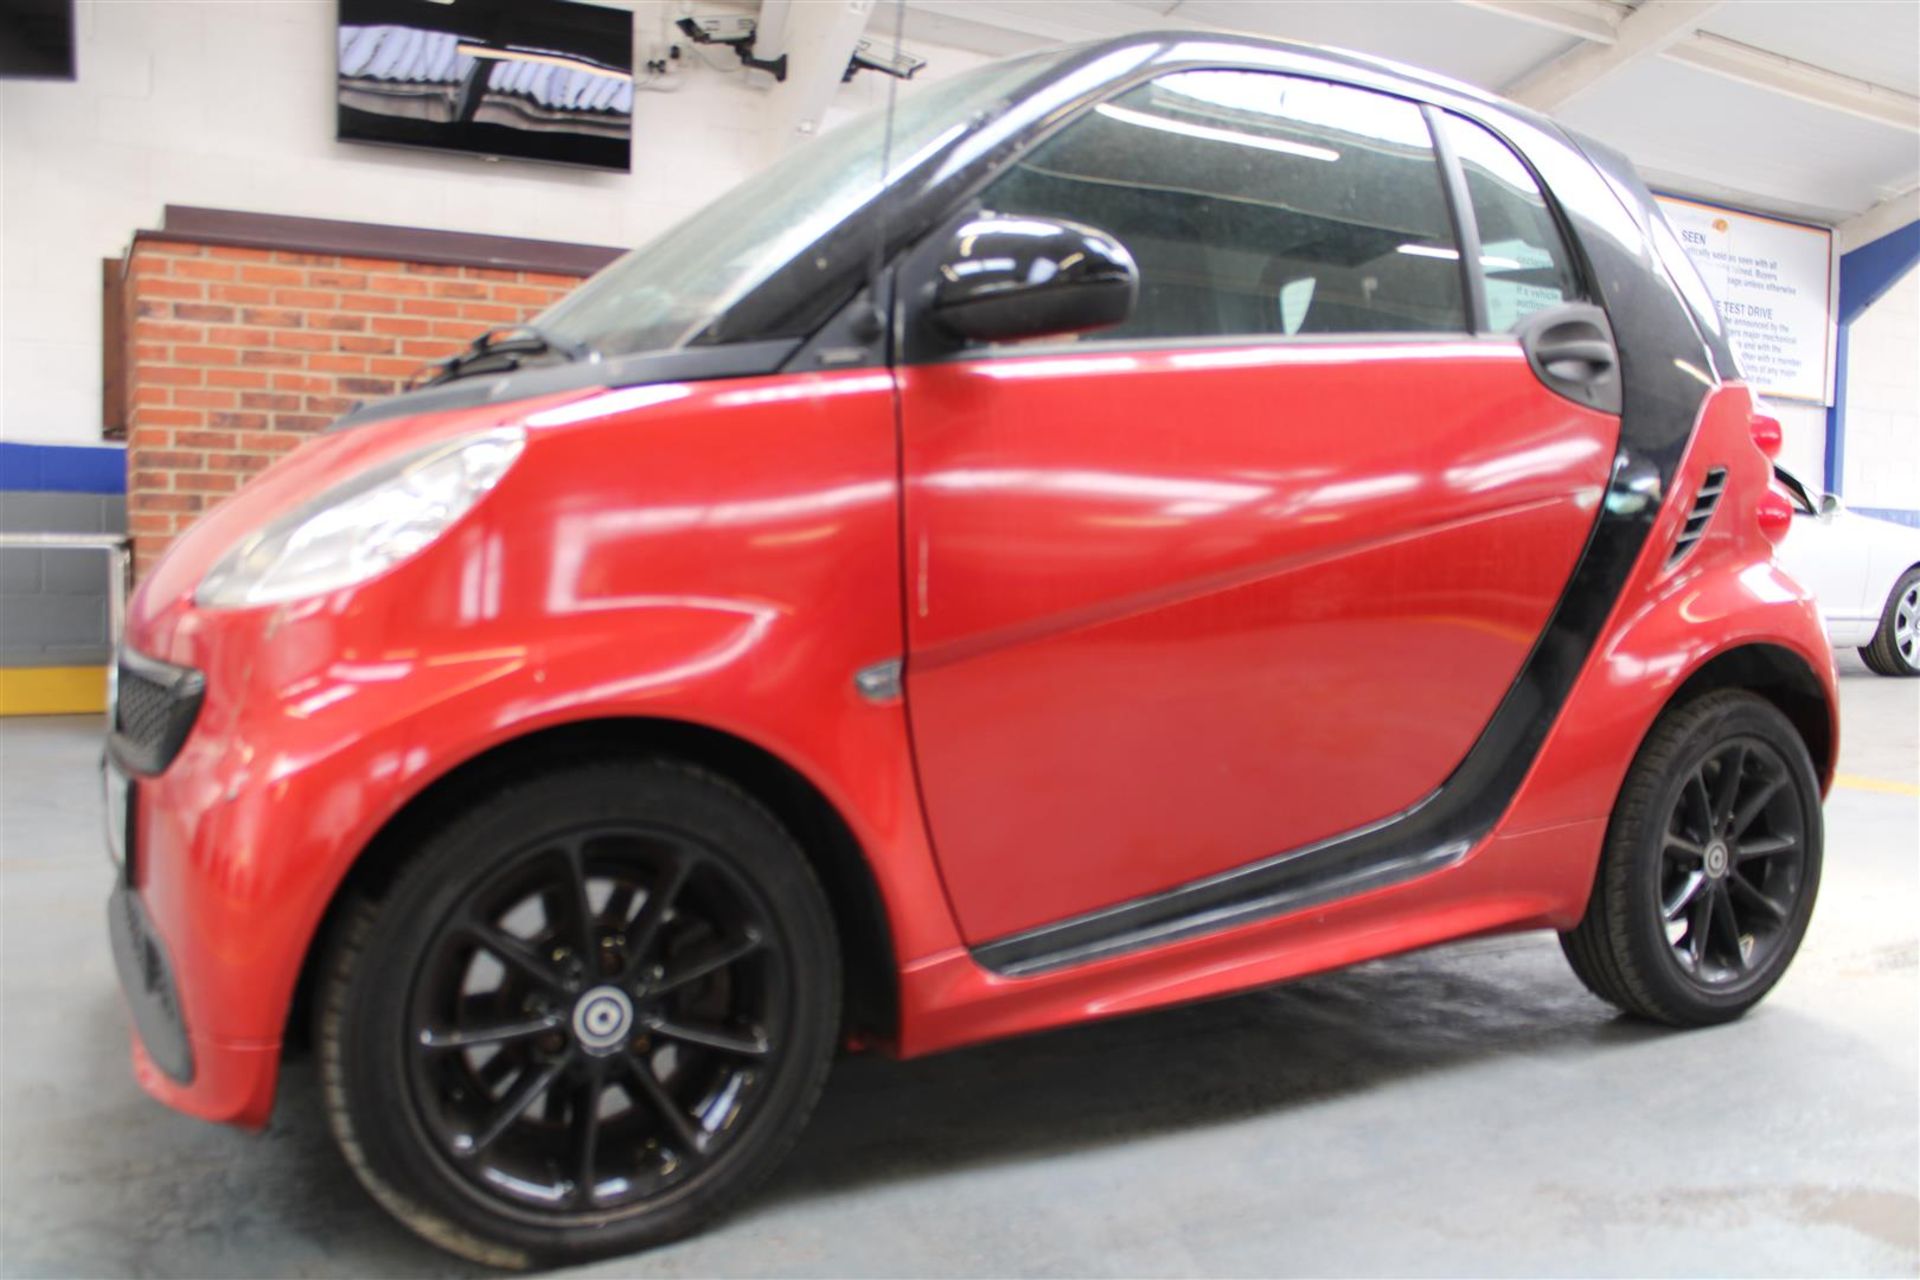 62 12 Smart Fortwo Passion MHD - Image 2 of 27